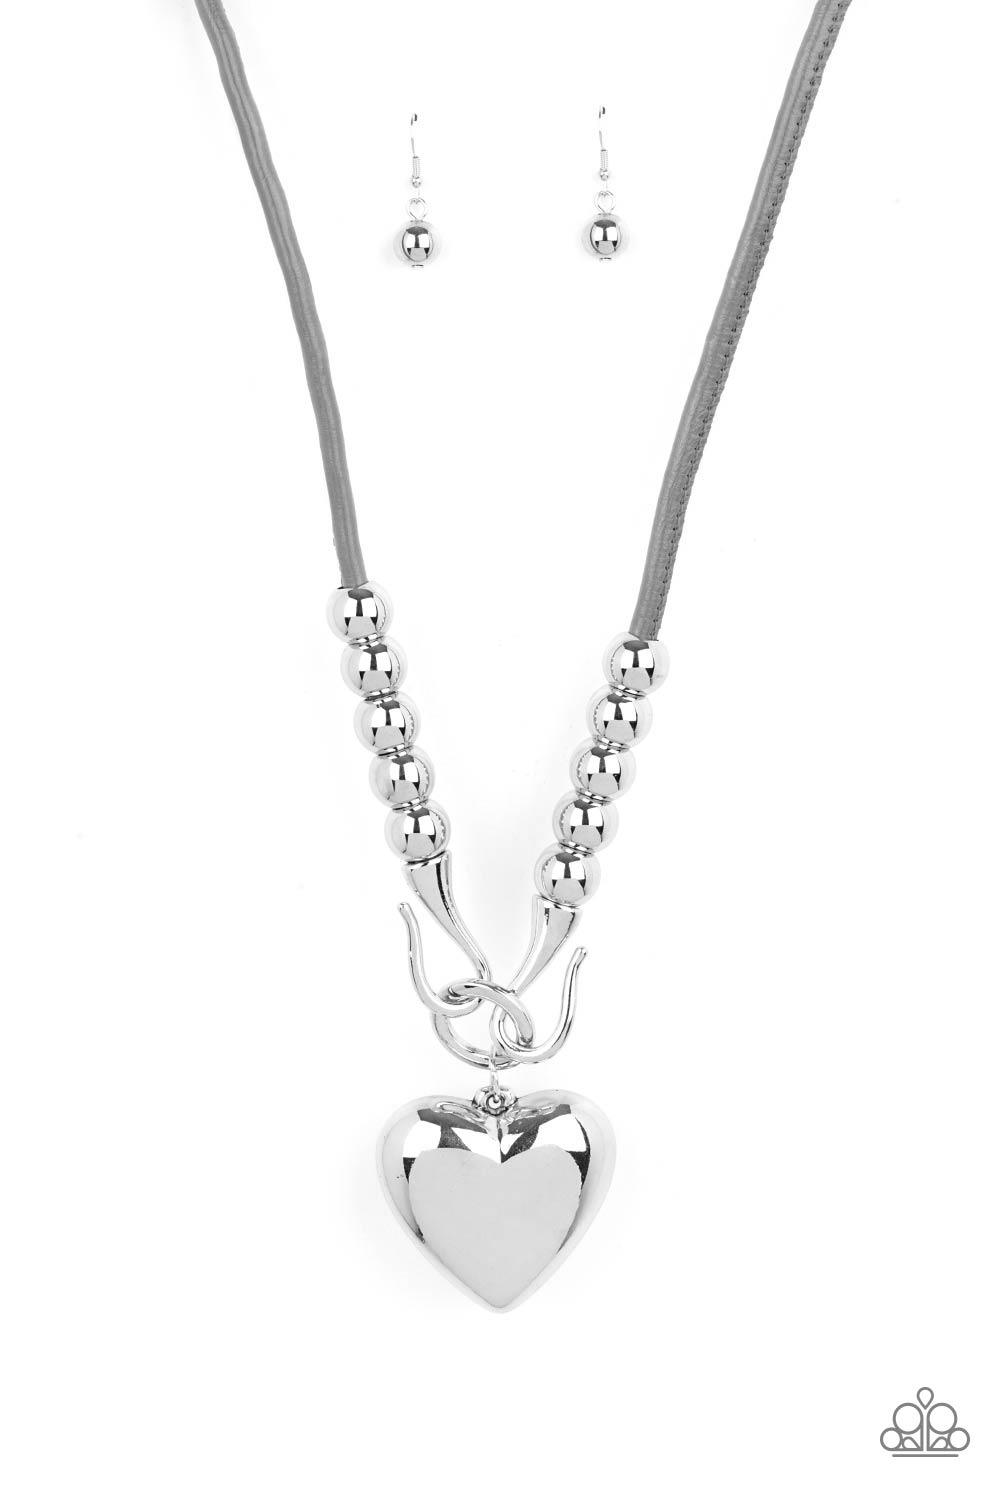 Paparazzi Accessories Forbidden Love - Silver Featuring chunky silver beads, an oversized silver heart pendant swings from dramatic silver hook-like fittings that attach to a bold gray leather cord draped across the chest for a haute heartbreaker look. Fe